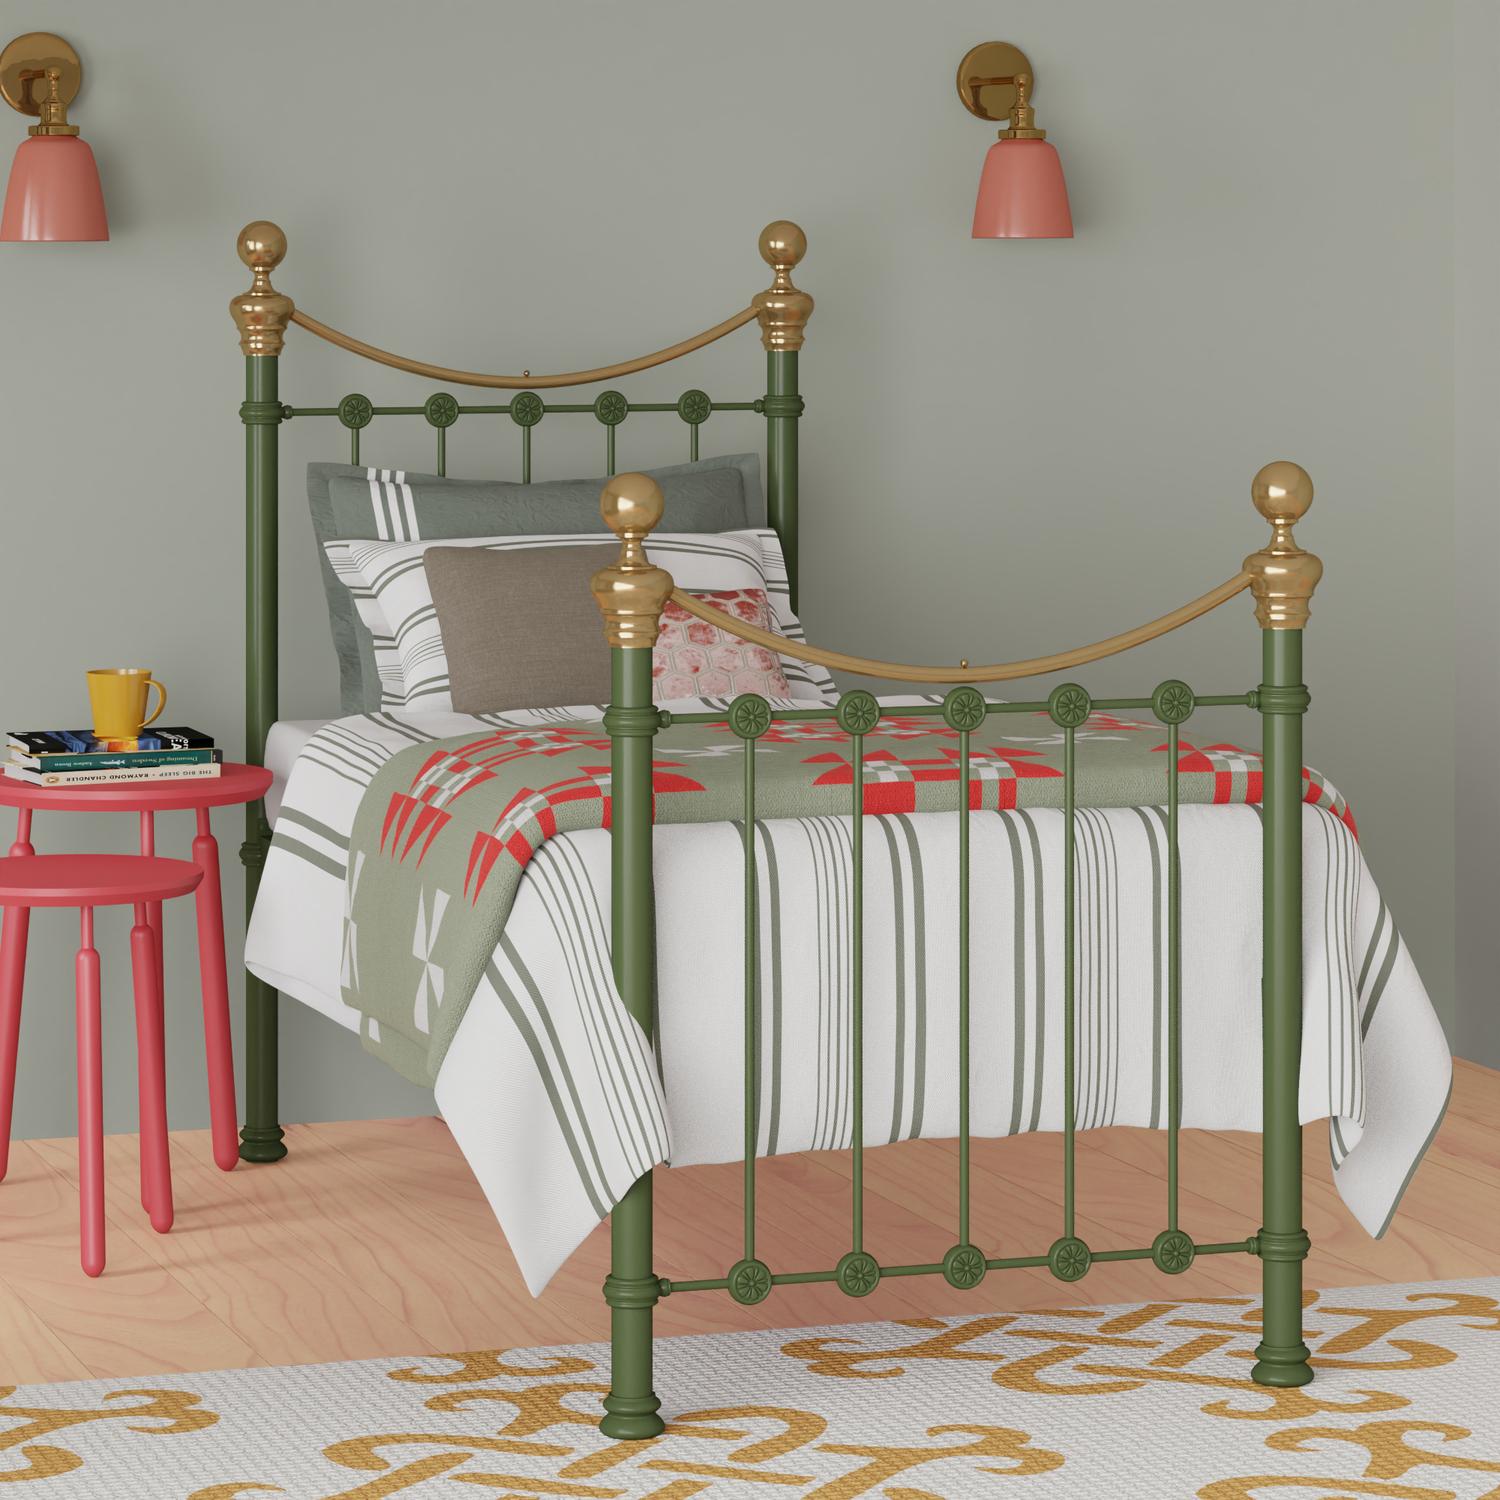 Selkirk iron bed in Green - Image green, pink and gold bedroom